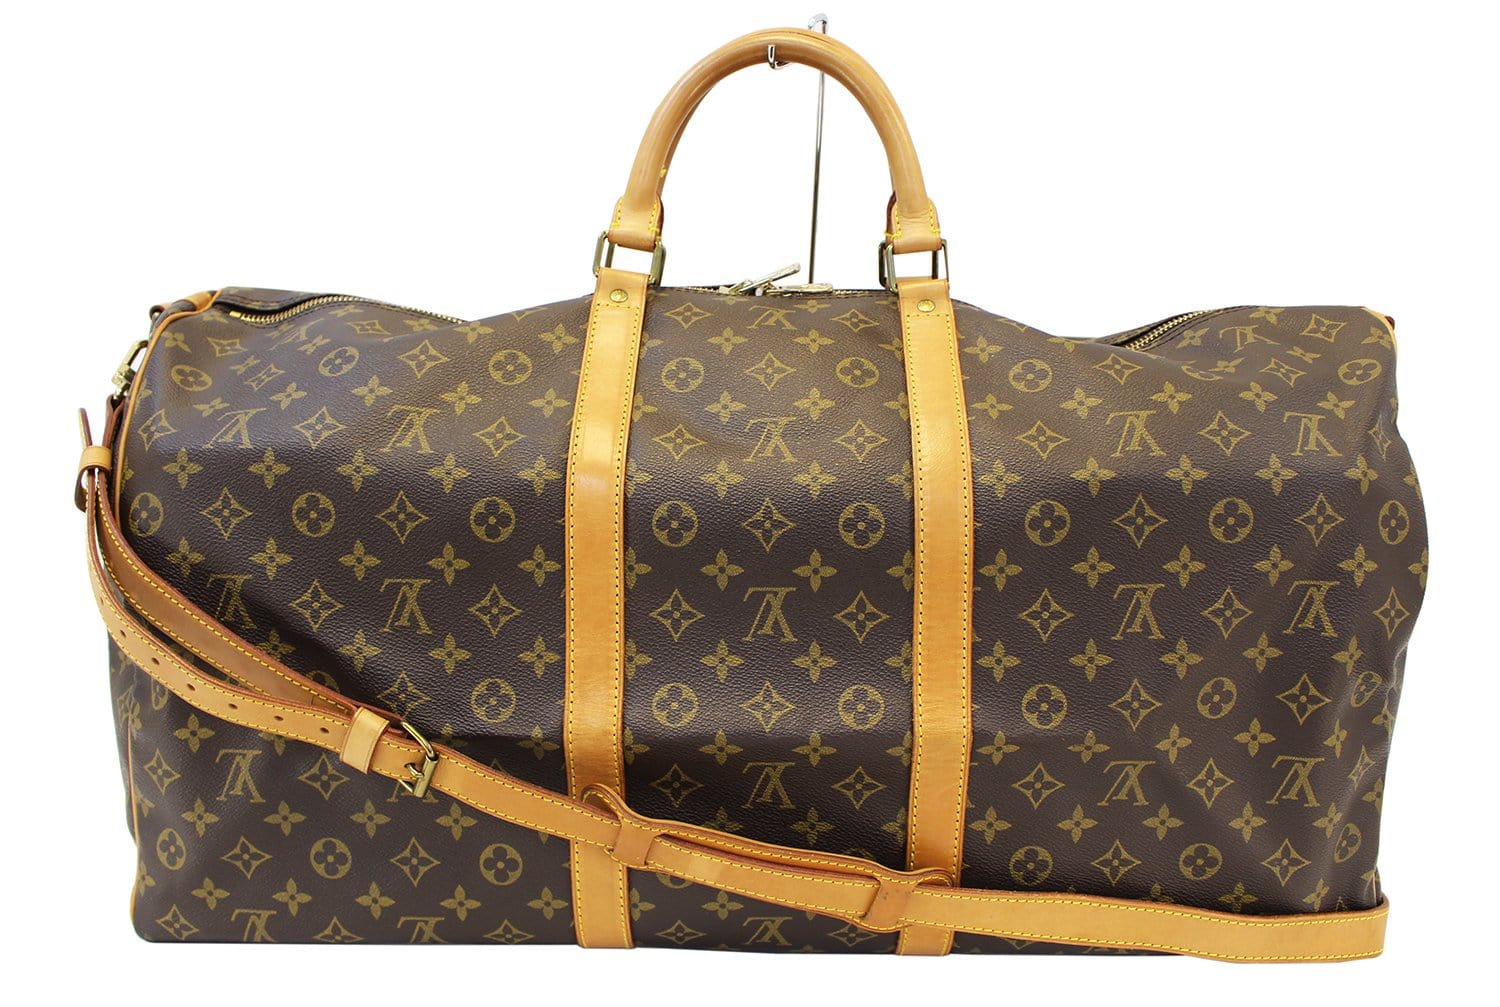 Authentic LOUIS VUITTON Monogram Keepall 60 Carry-on Travel 